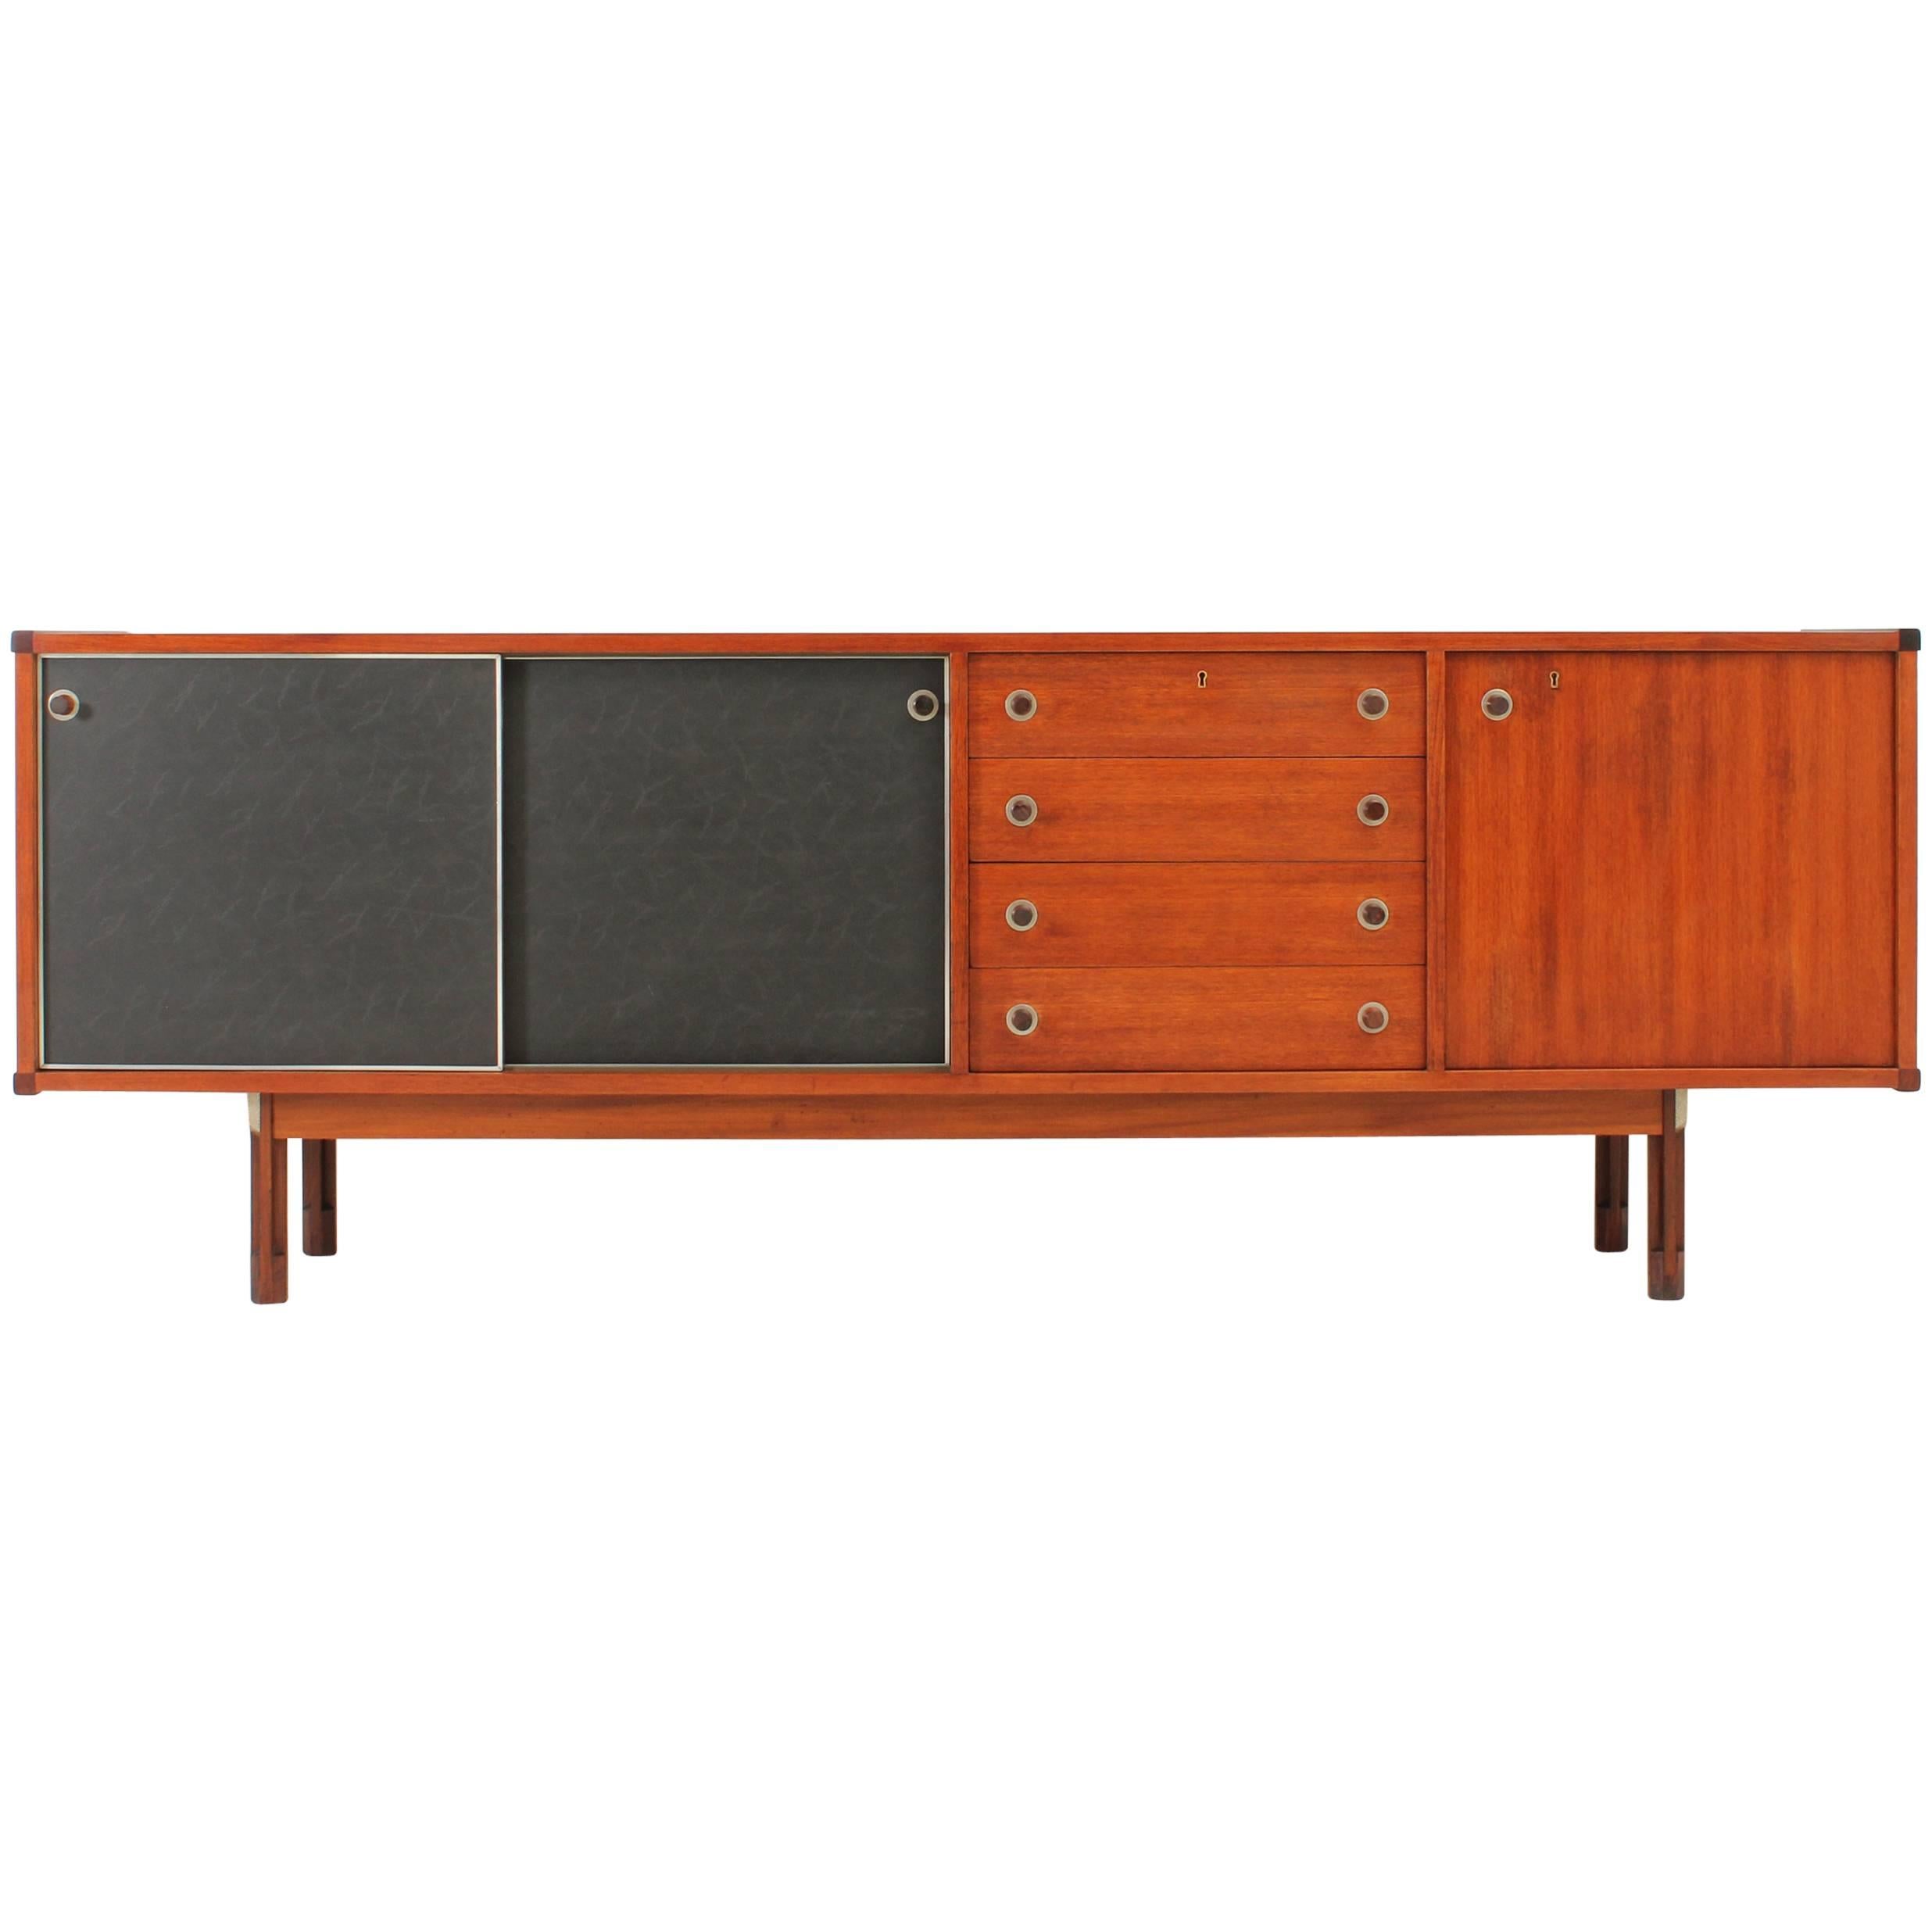 Italian Sideboard in Teak and Rosewood For Sale